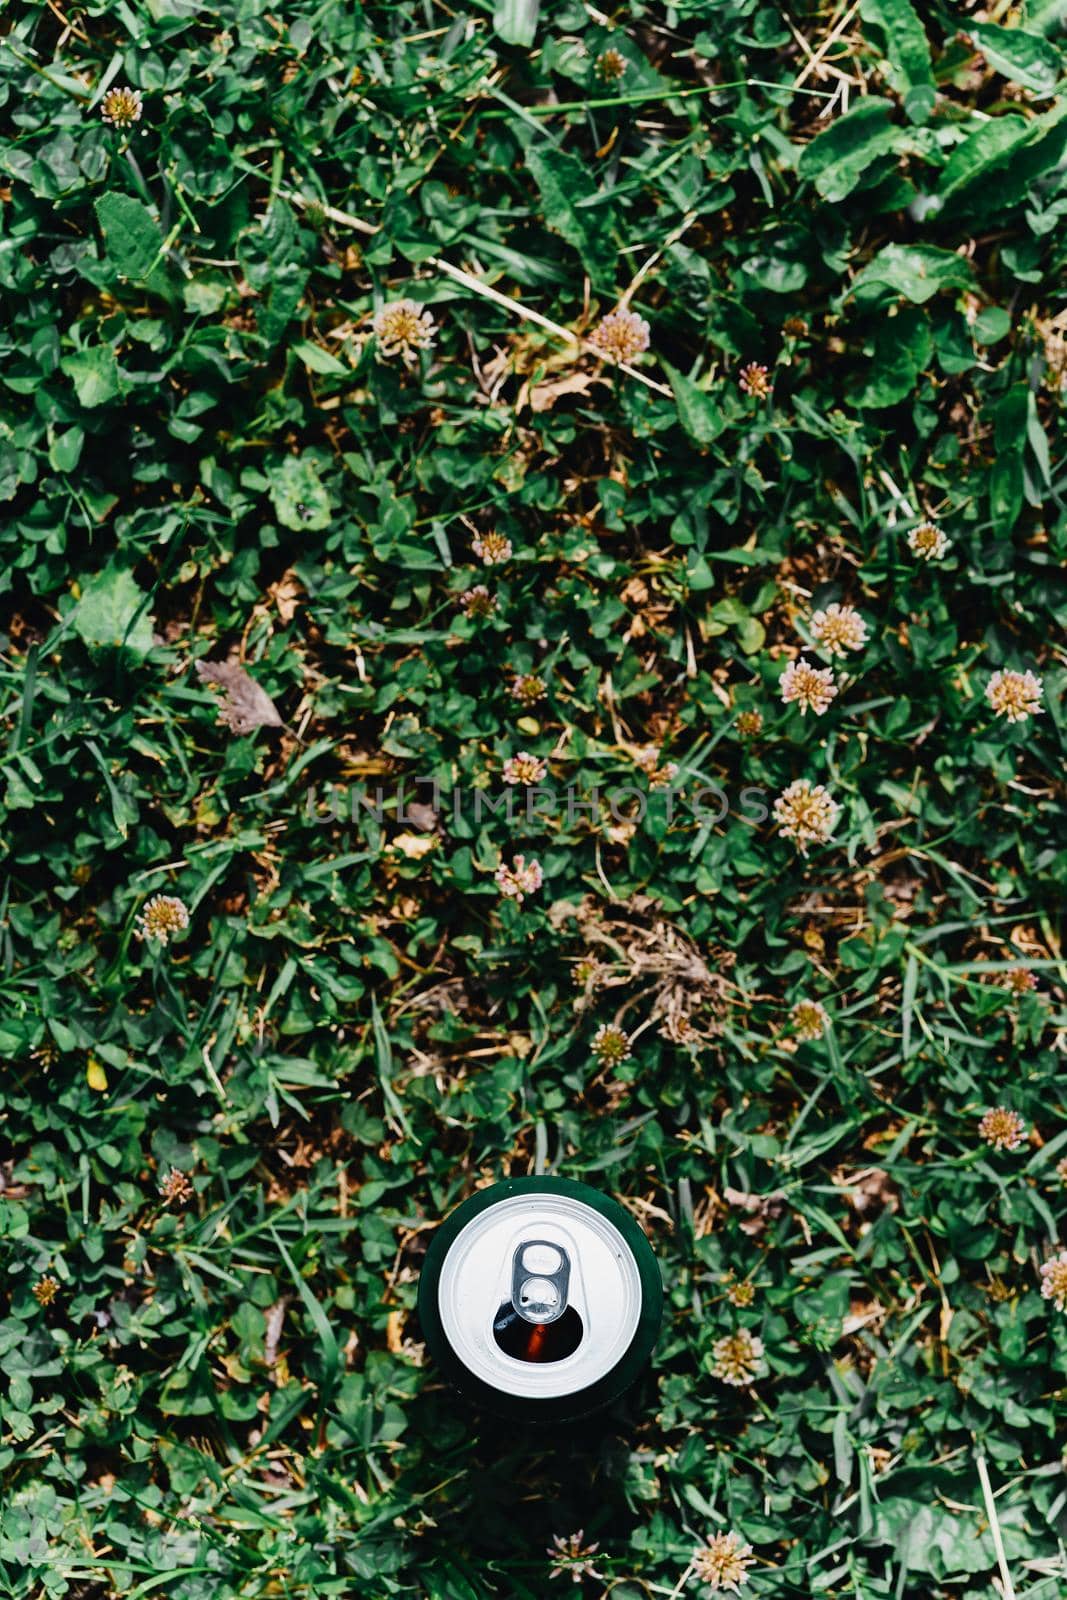 A can of beer against the grass is a view of the top background image for the design